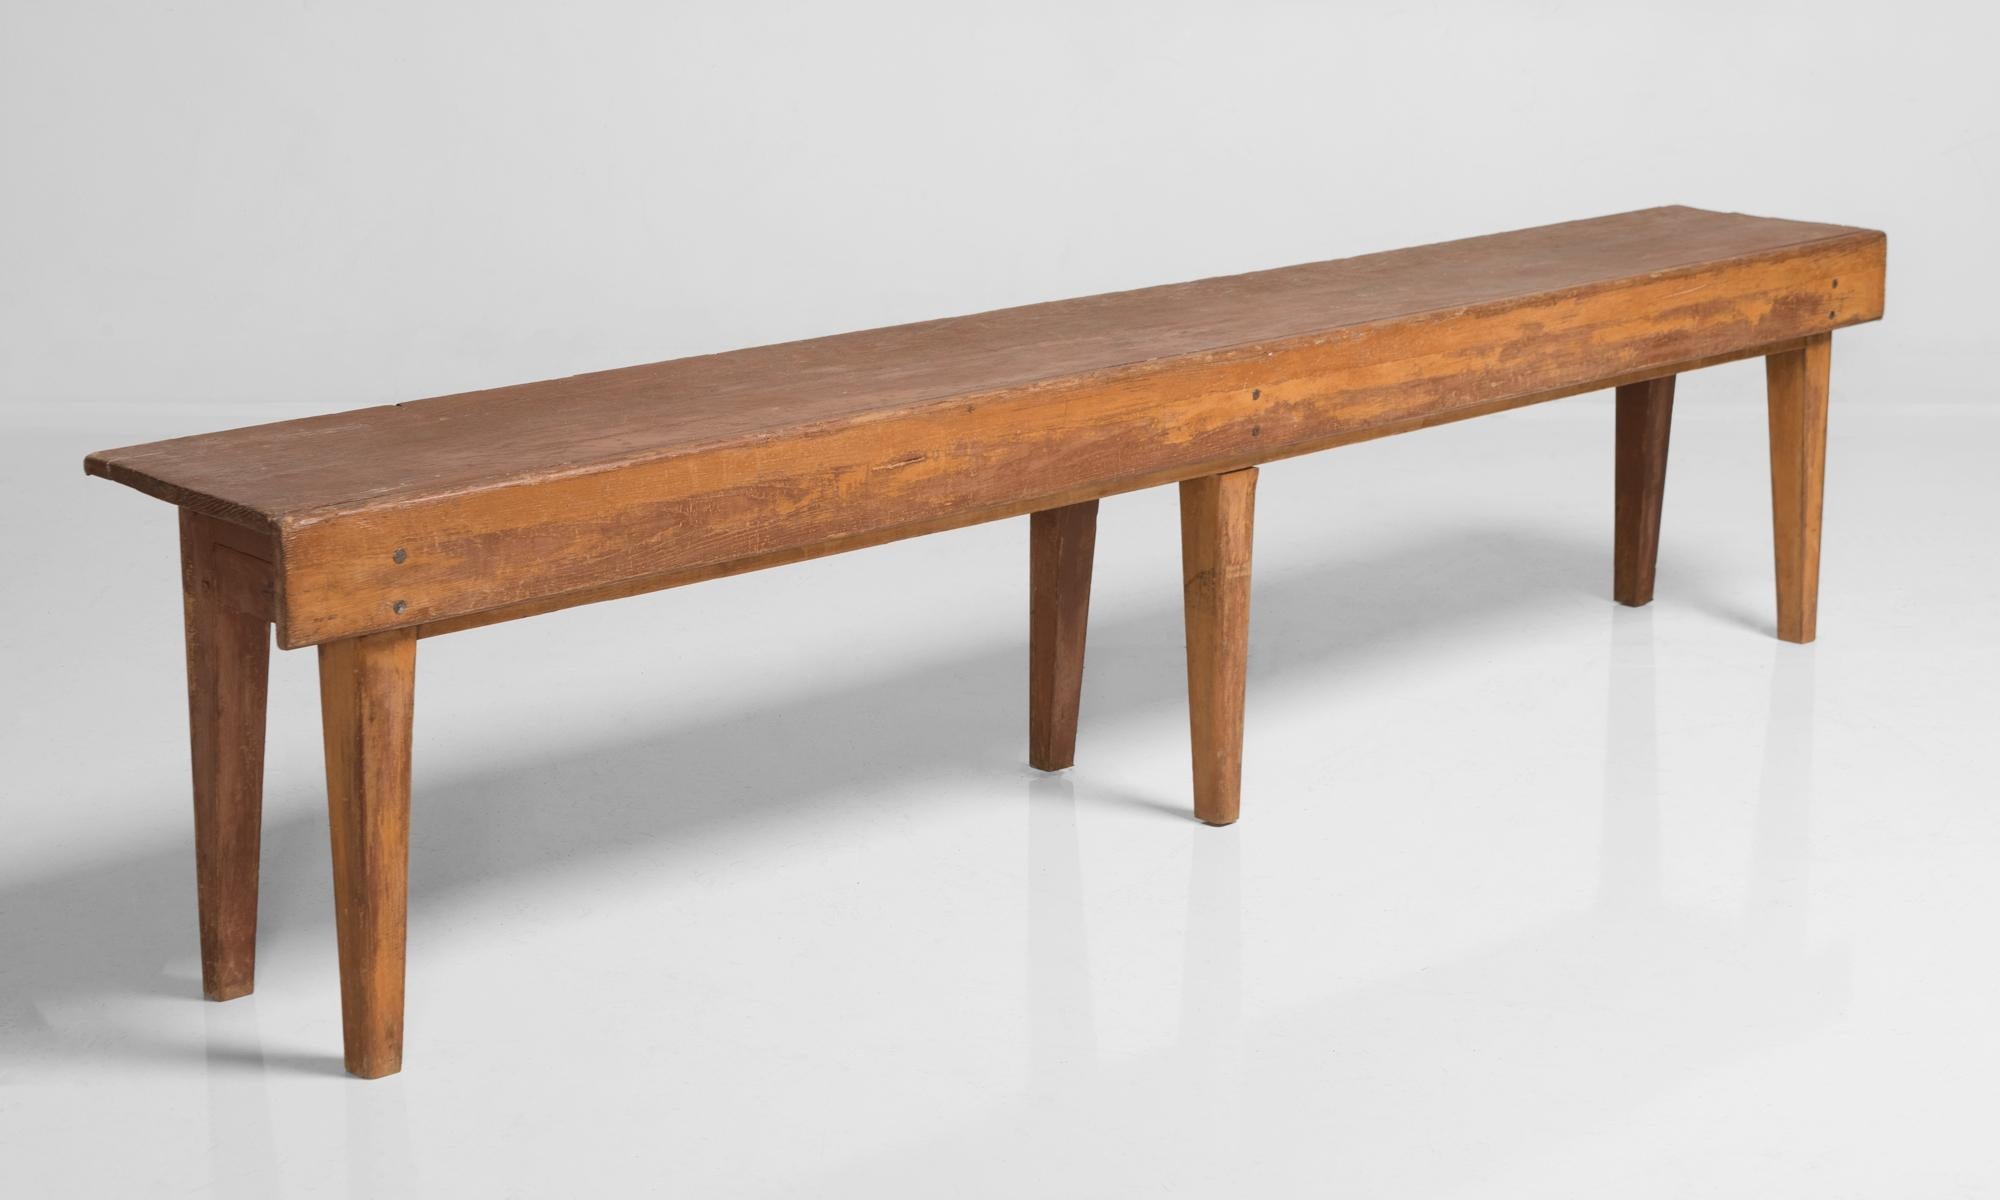 Primitive bench, Sweden 19th century.

Long, minimal form with wonderful patina and simple construction.